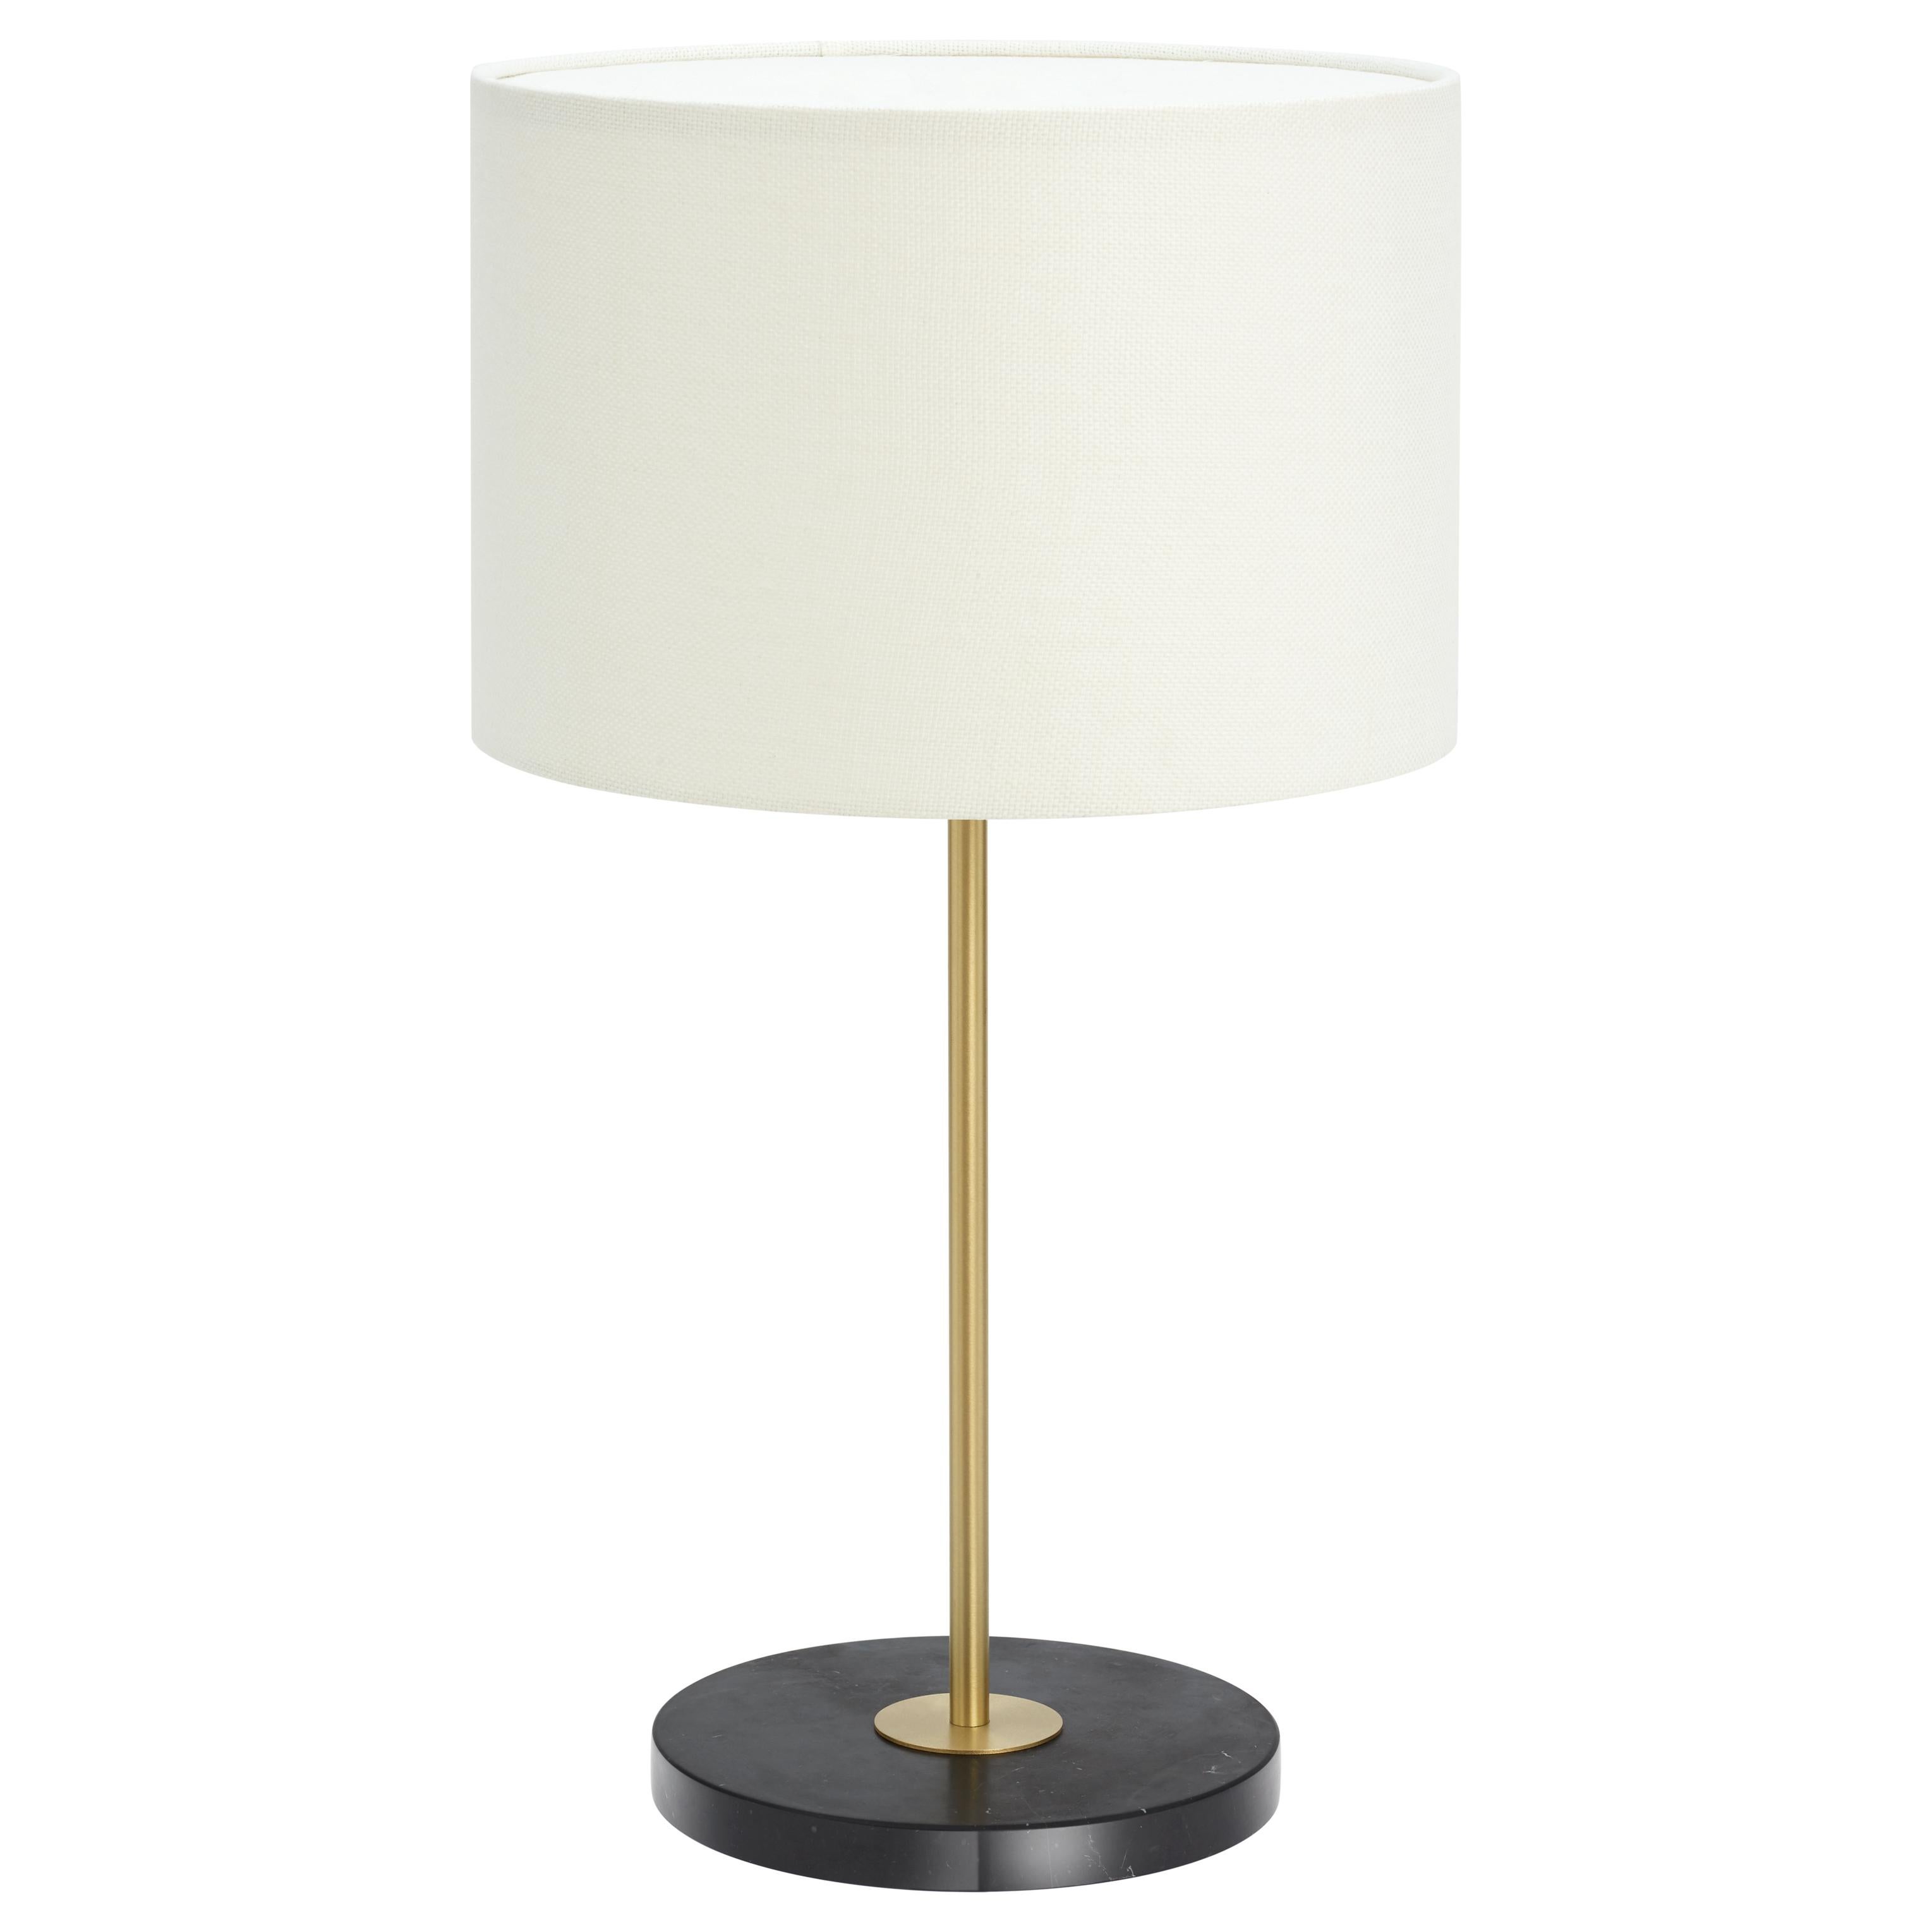 Tall black marquina marble mayfair table lamp by CTO Lighting
Materials: Polished black marquina marble base with satin brass and white linen shade
Dimensions: 38 x H 72 cm

All our lamps can be wired according to each country. If sold to the USA it